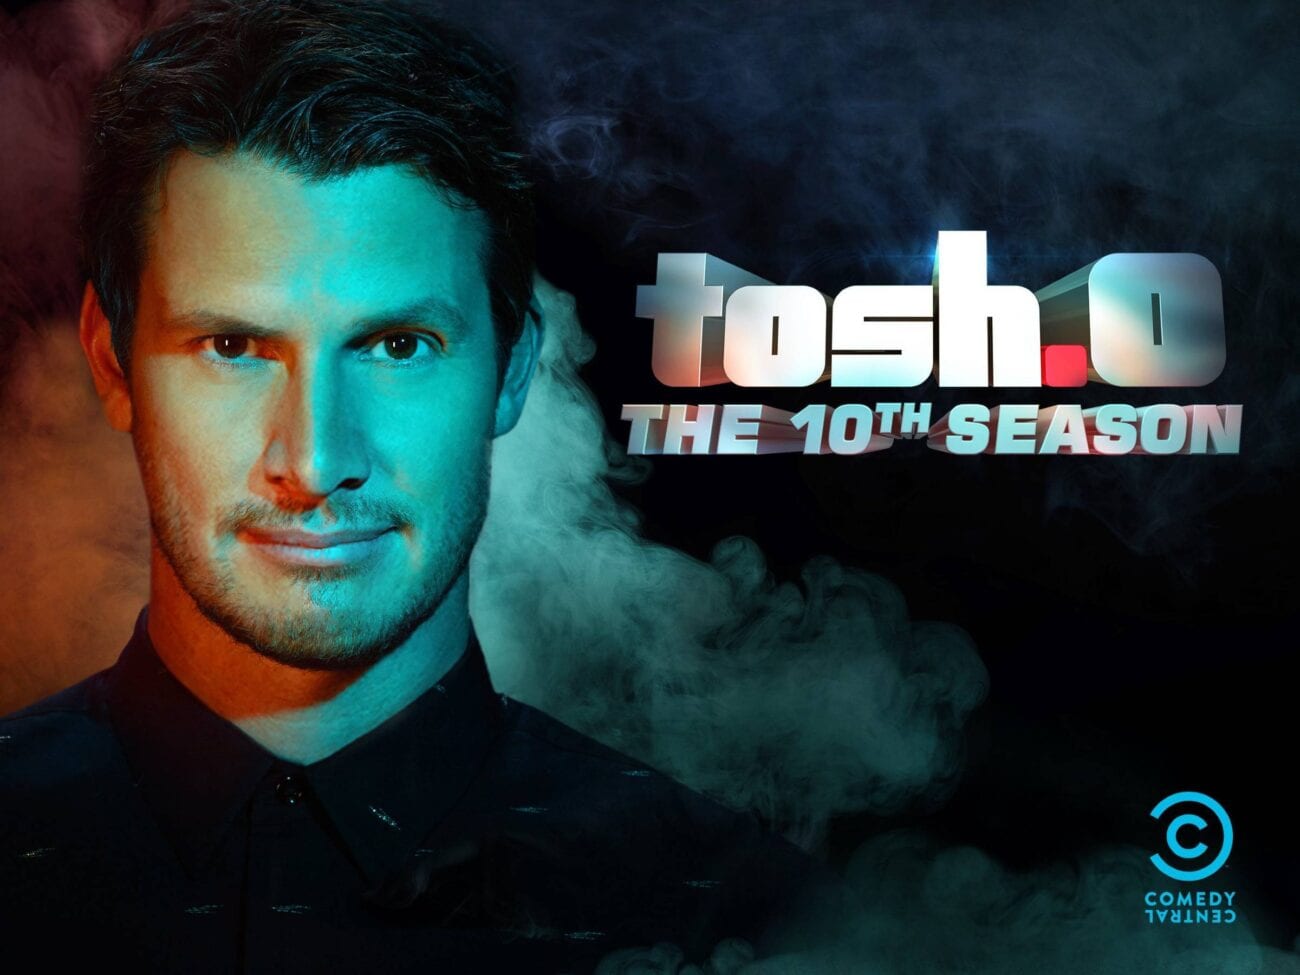 Daniel Tosh’s comedy show 'Tosh.0' may be cursed. Here are the guests who died since being on his show.